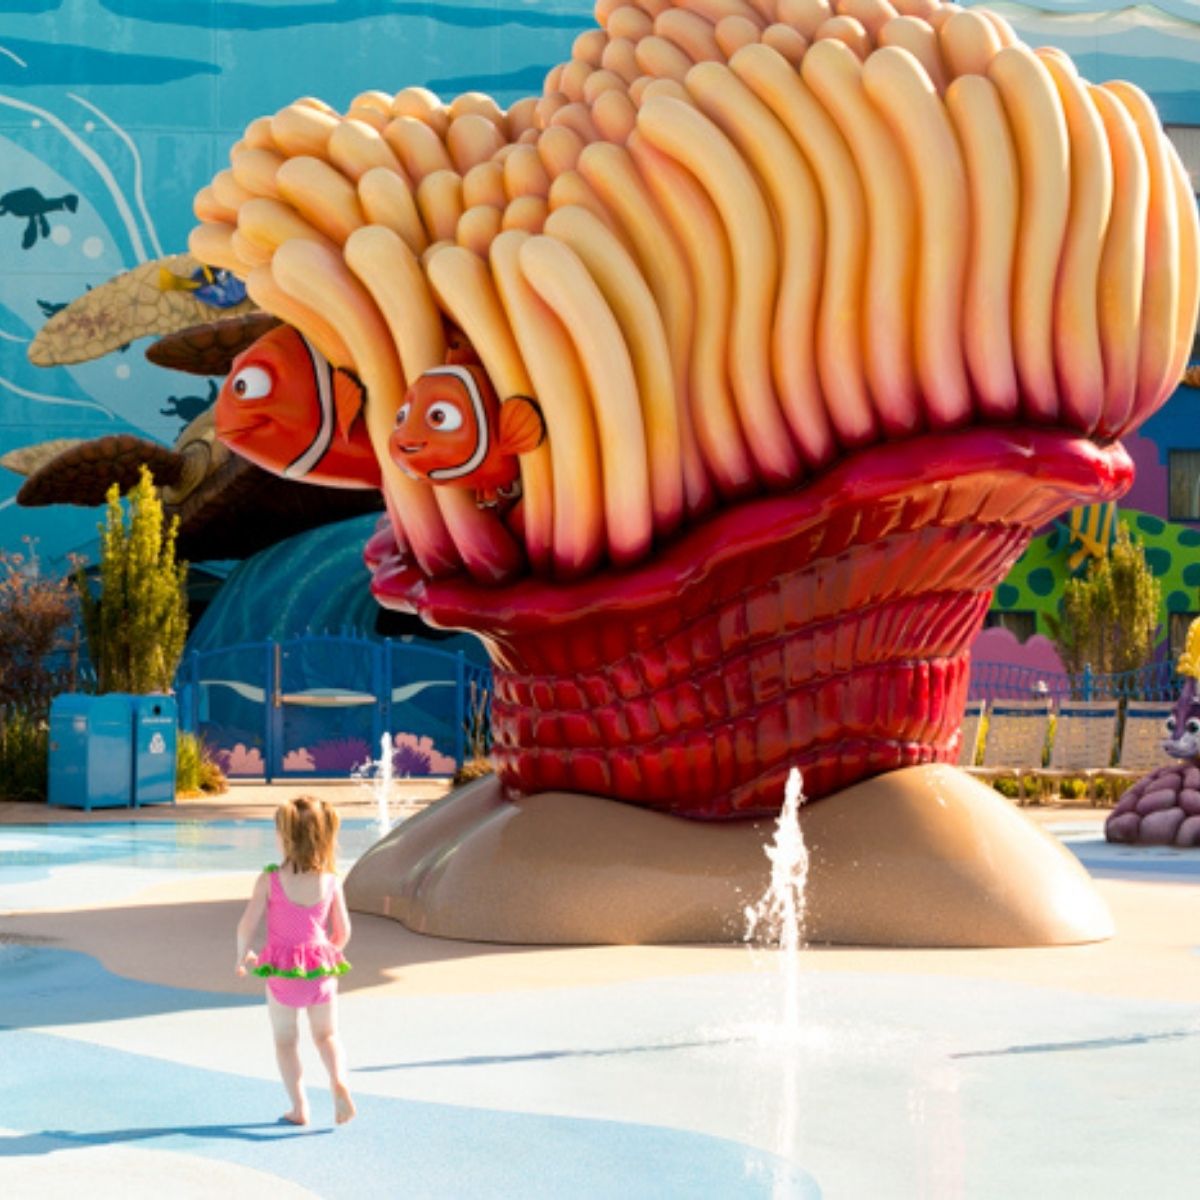 A young girl looks at the giant Nemo statue at the Art of Animation Resort in Walt Disney World.